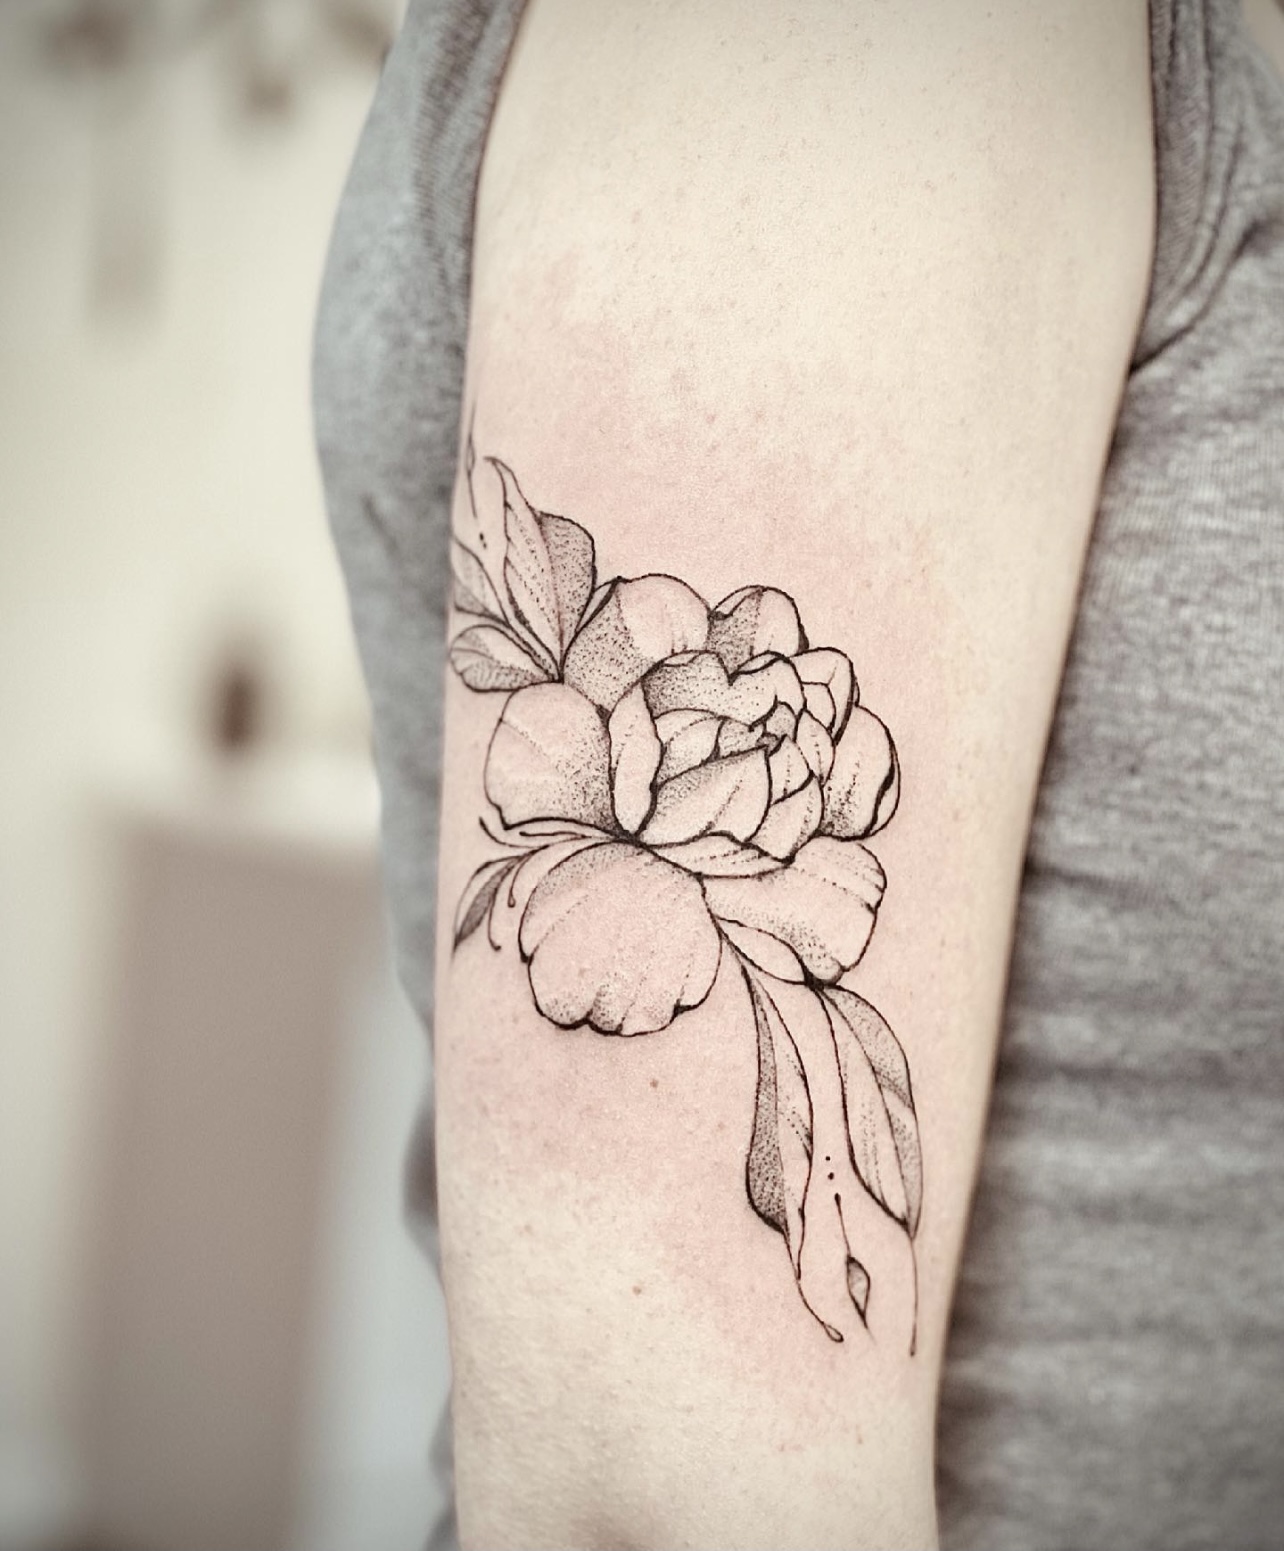 A woman with a tattoo of a flower on her arm.